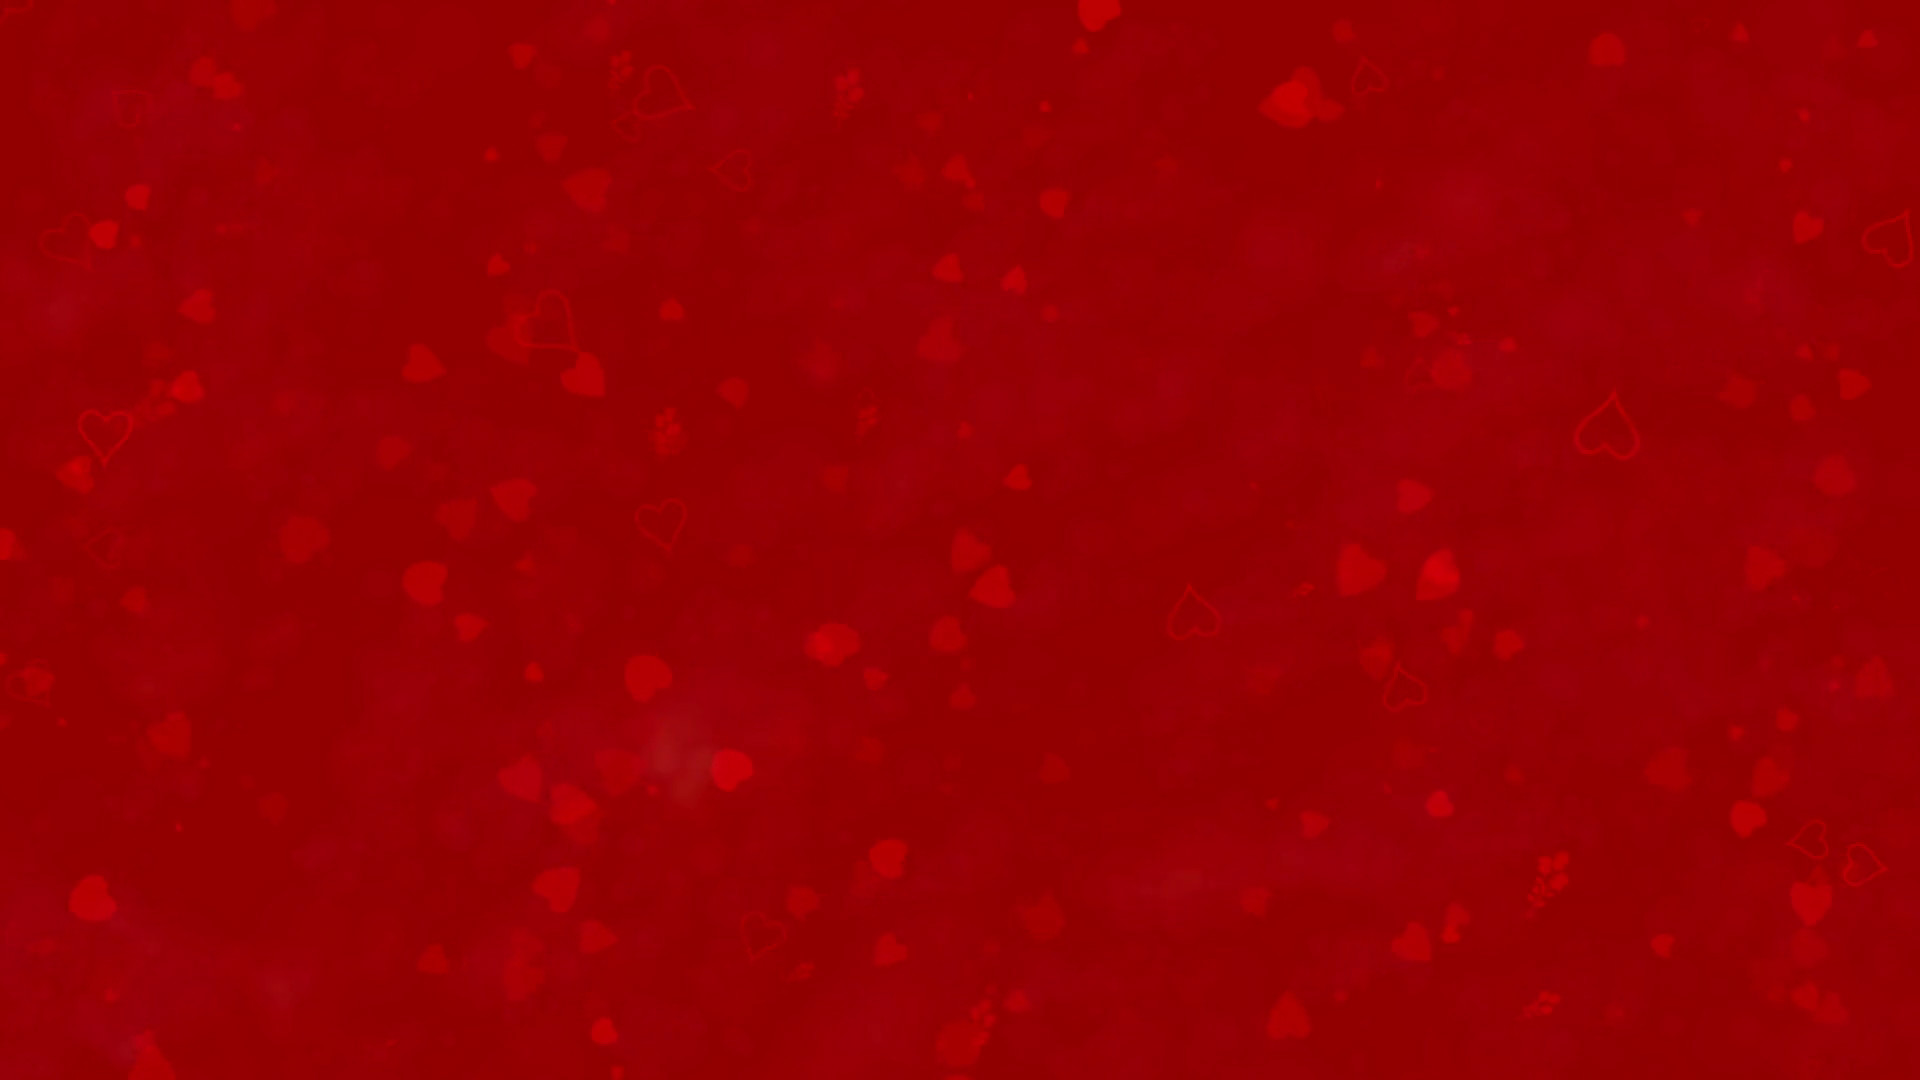 1920x1080 "I Love You" text in Portuguese and Spanish "Te Amo" formed from dust and  turns to dust horizontally on red background Motion Background - VideoBlocks